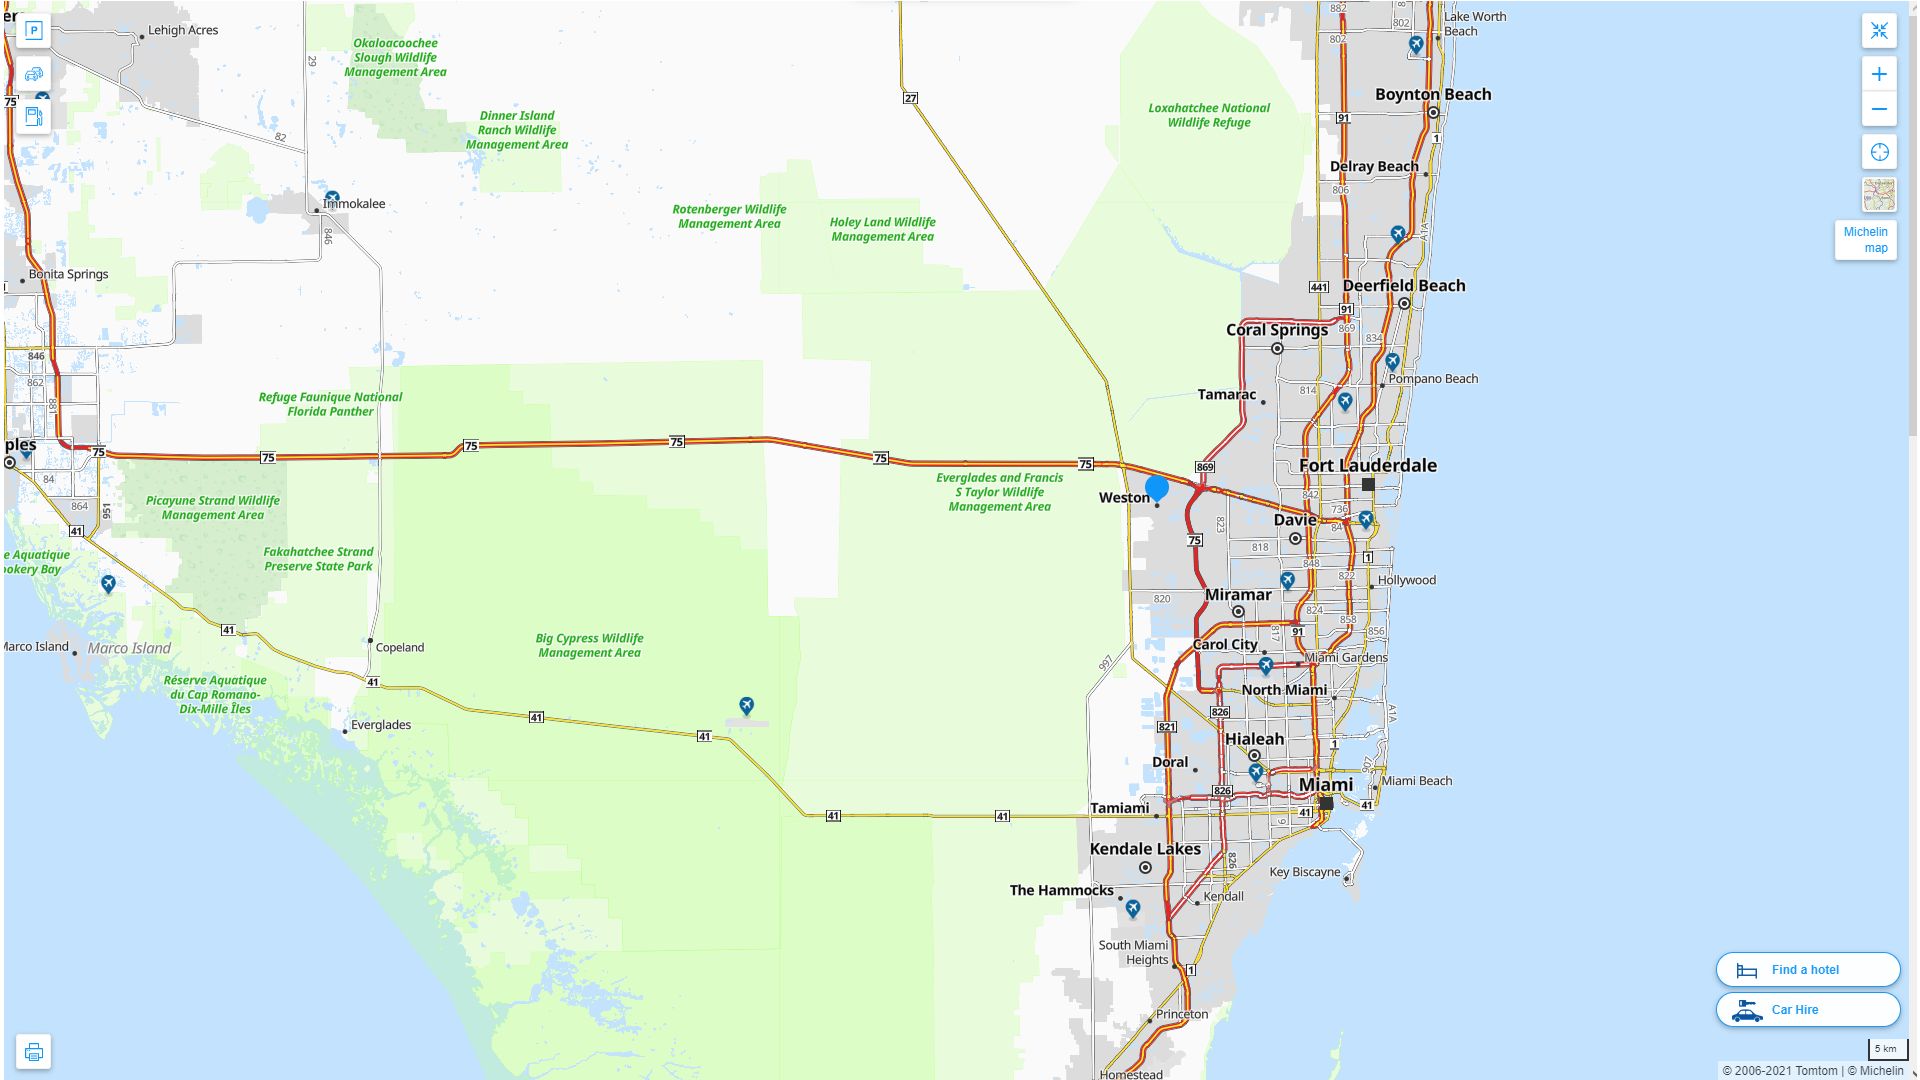 Weston Florida Highway and Road Map